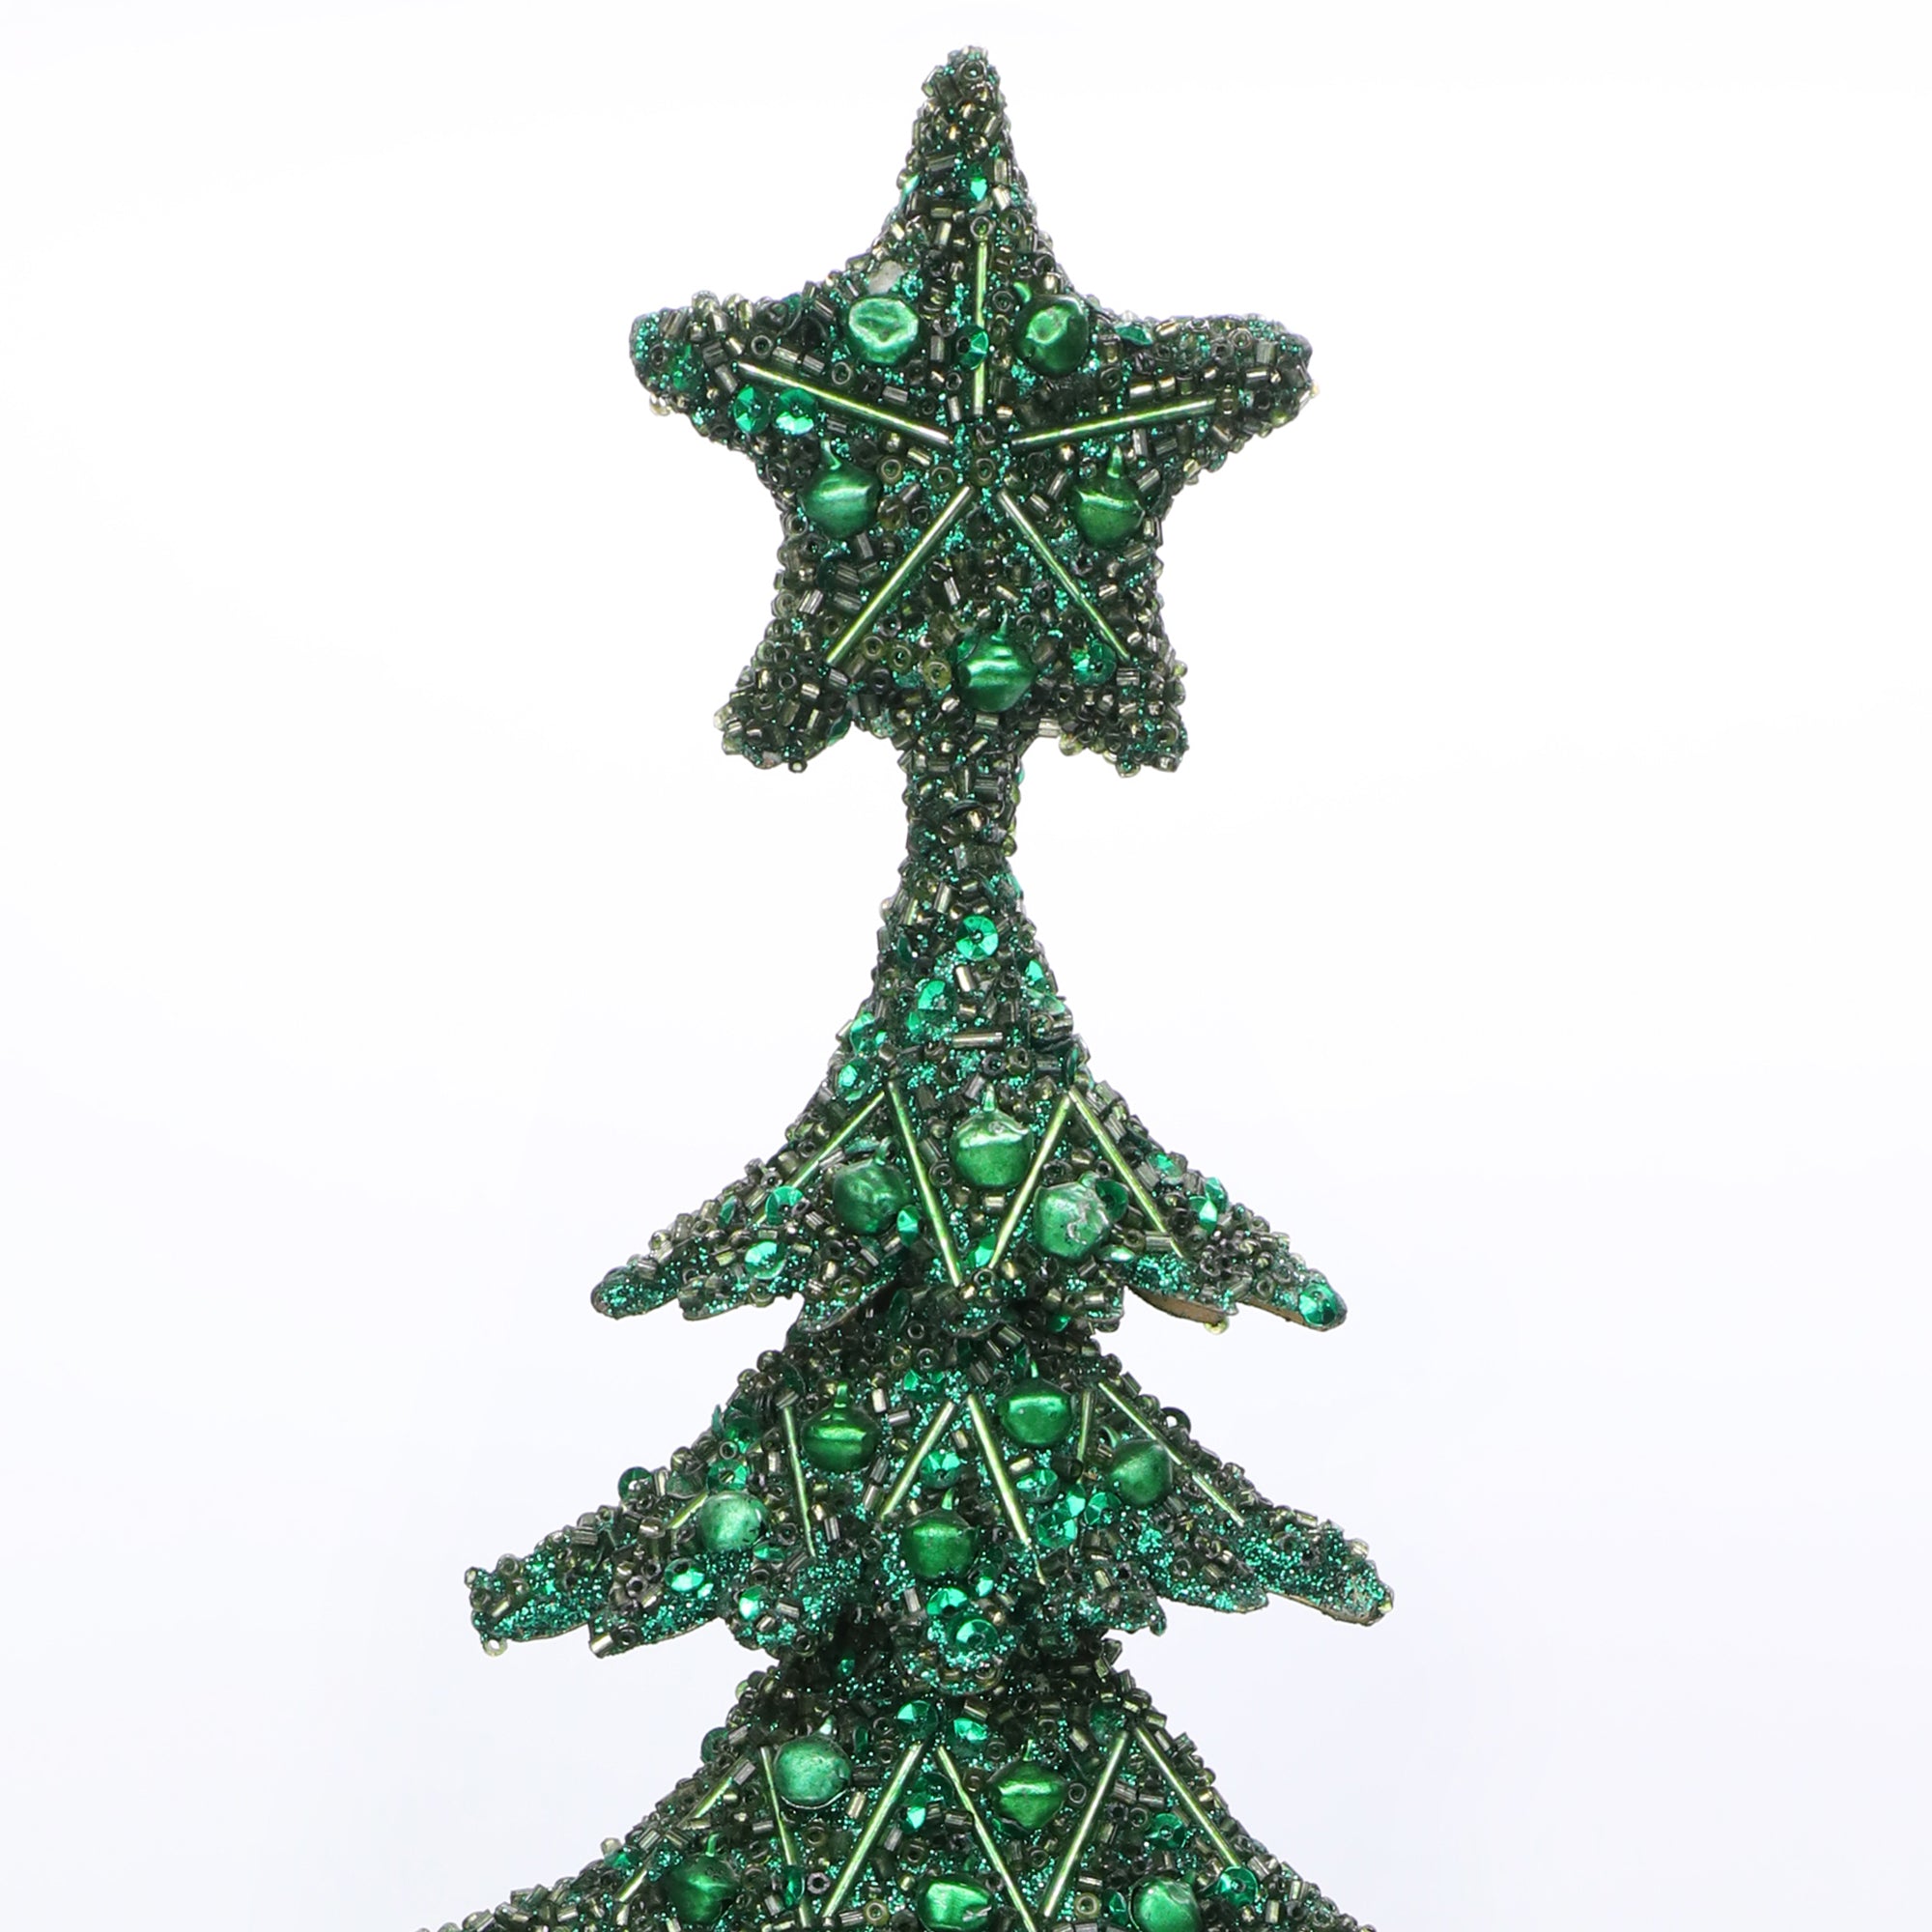 Dickens Beaded Christmas Tree / Green / 10"x19.2" / Set of 1 - trunkin.in